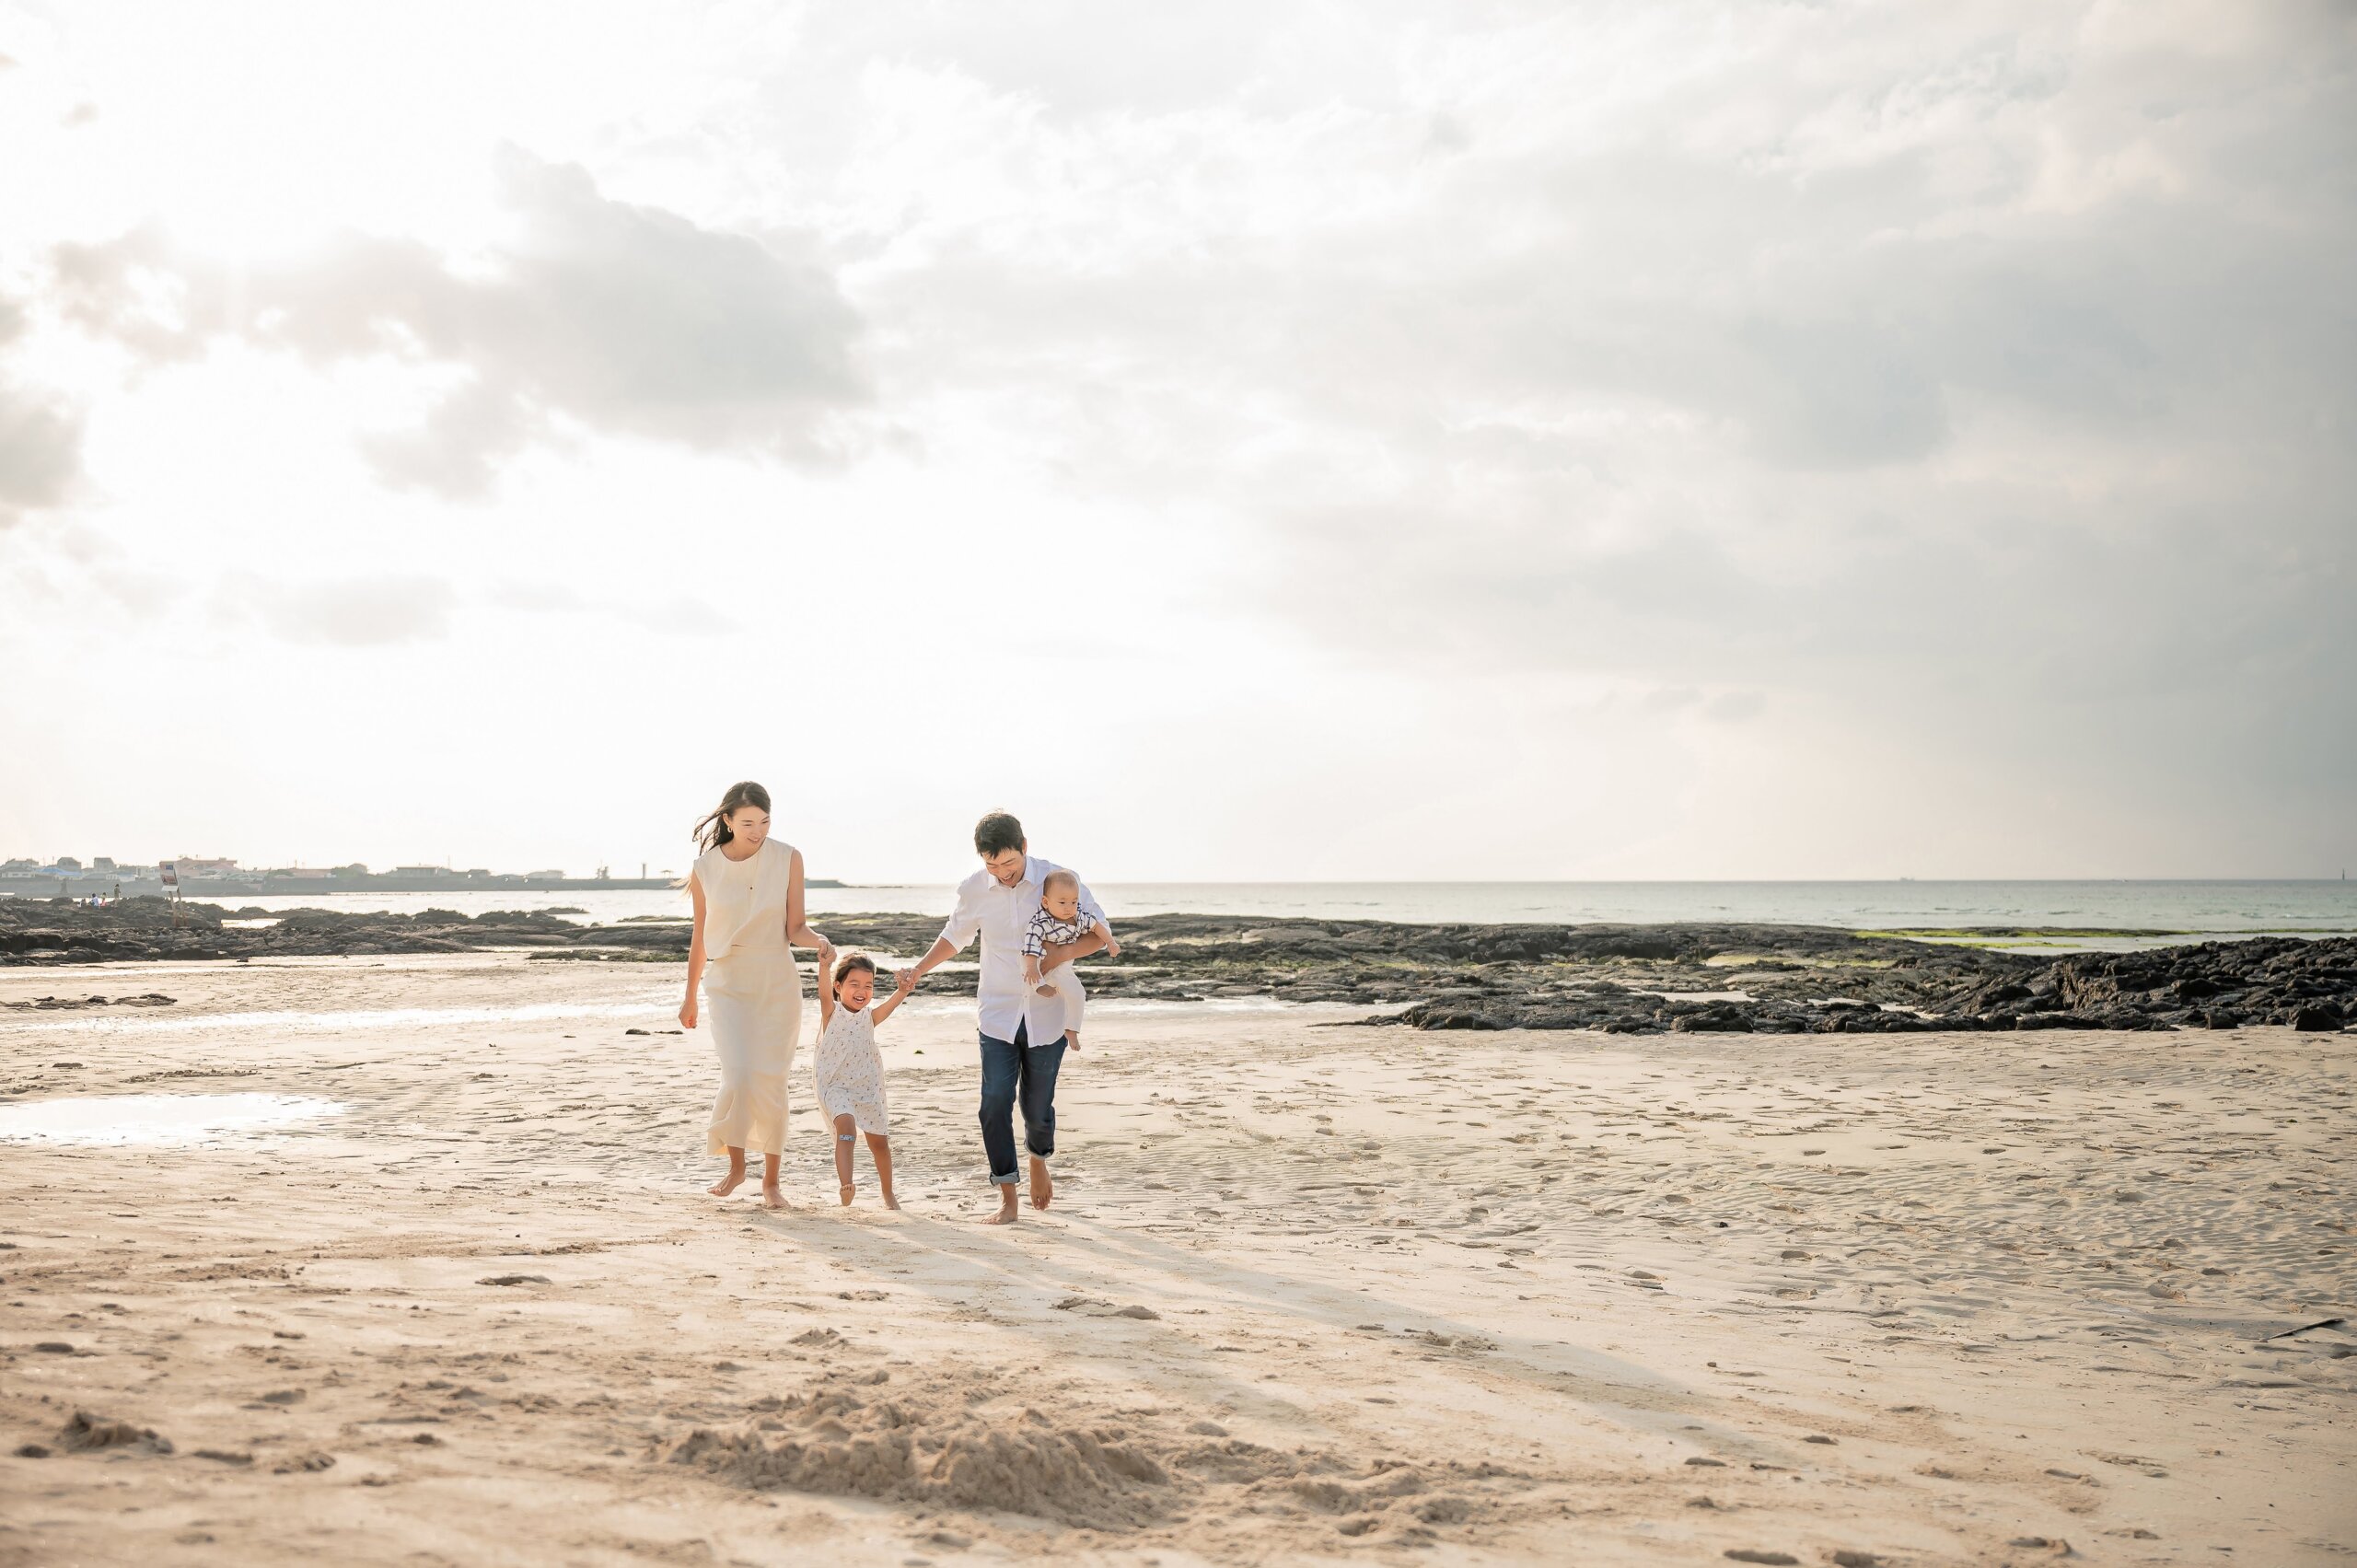 Man and woman walking on beach with young girl and baby